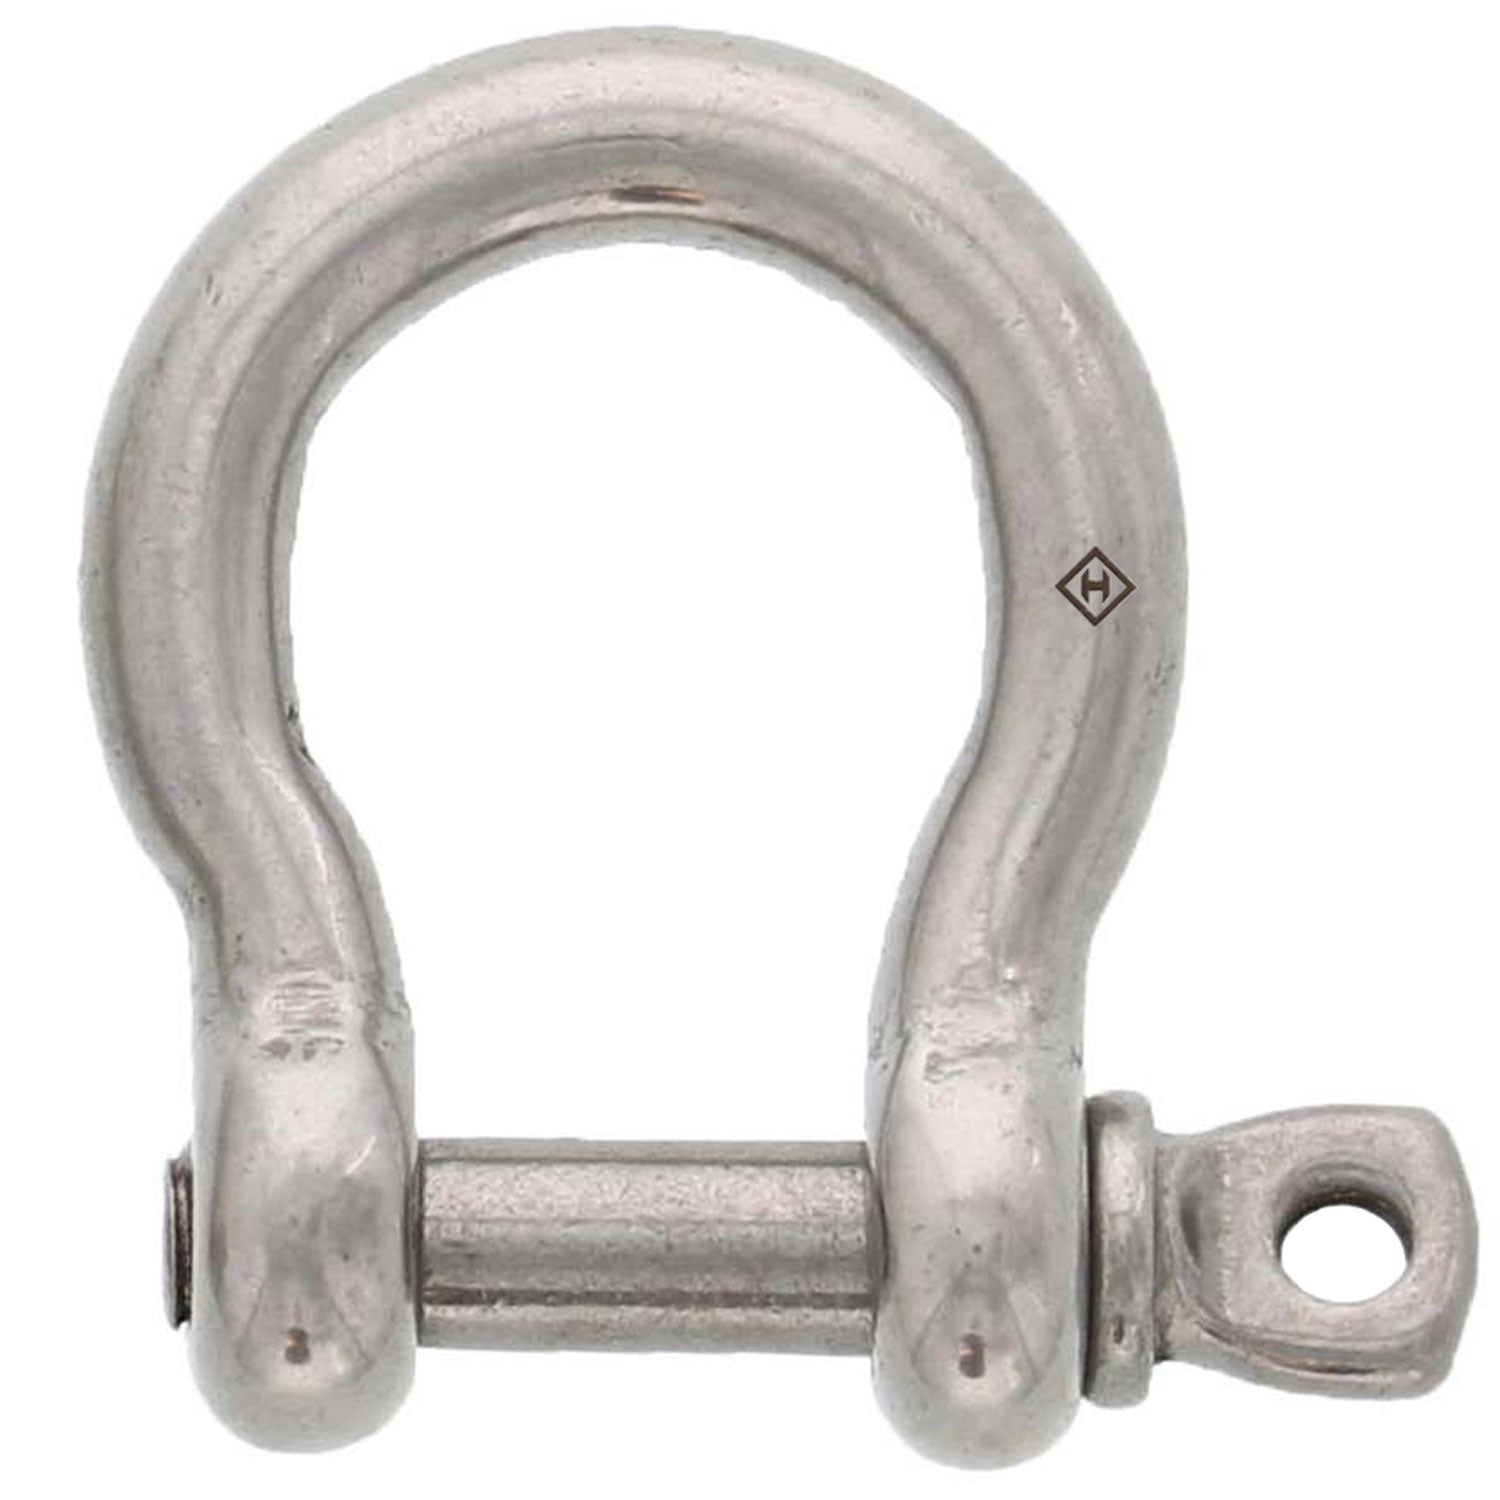 1/8 in., 285 lb, Type 316 Stainless Steel Screw Pin Anchor Shackle